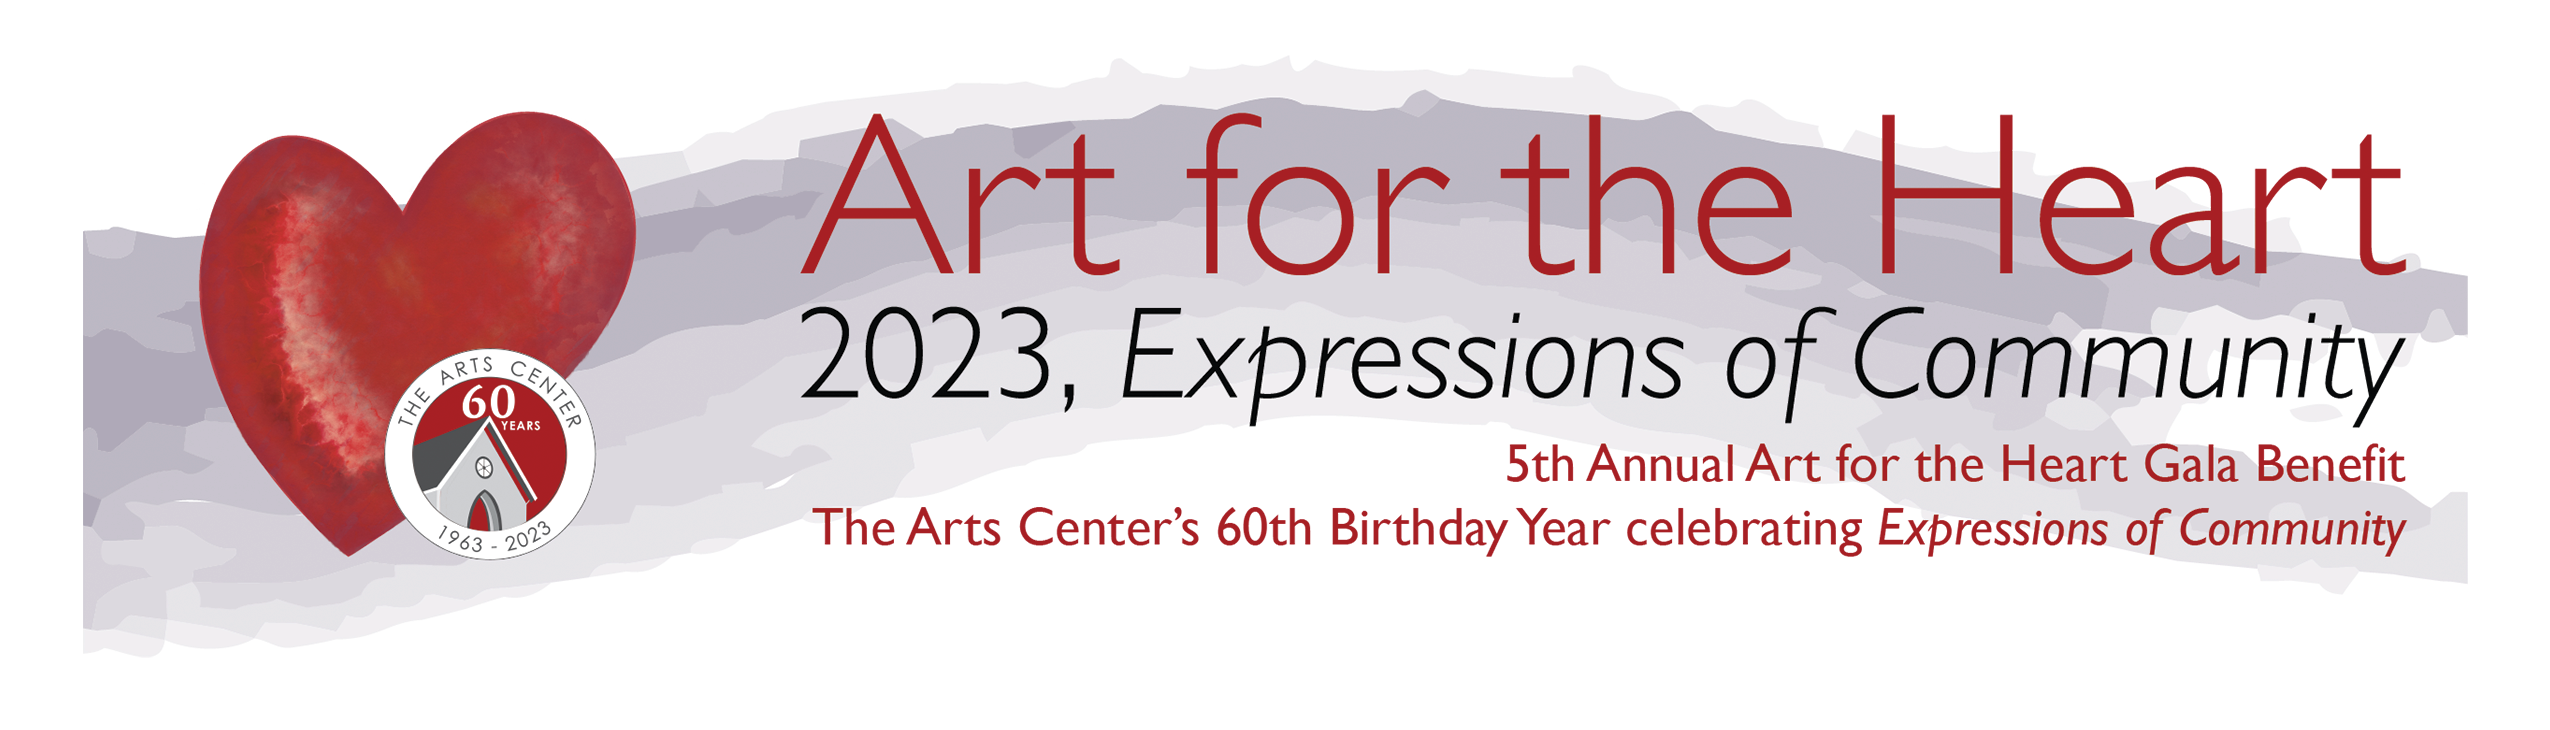 5th Annual Art for the Heart Gala Benefit. The Arts Center's 60th Birthday Year celebrating Expressions of Community.